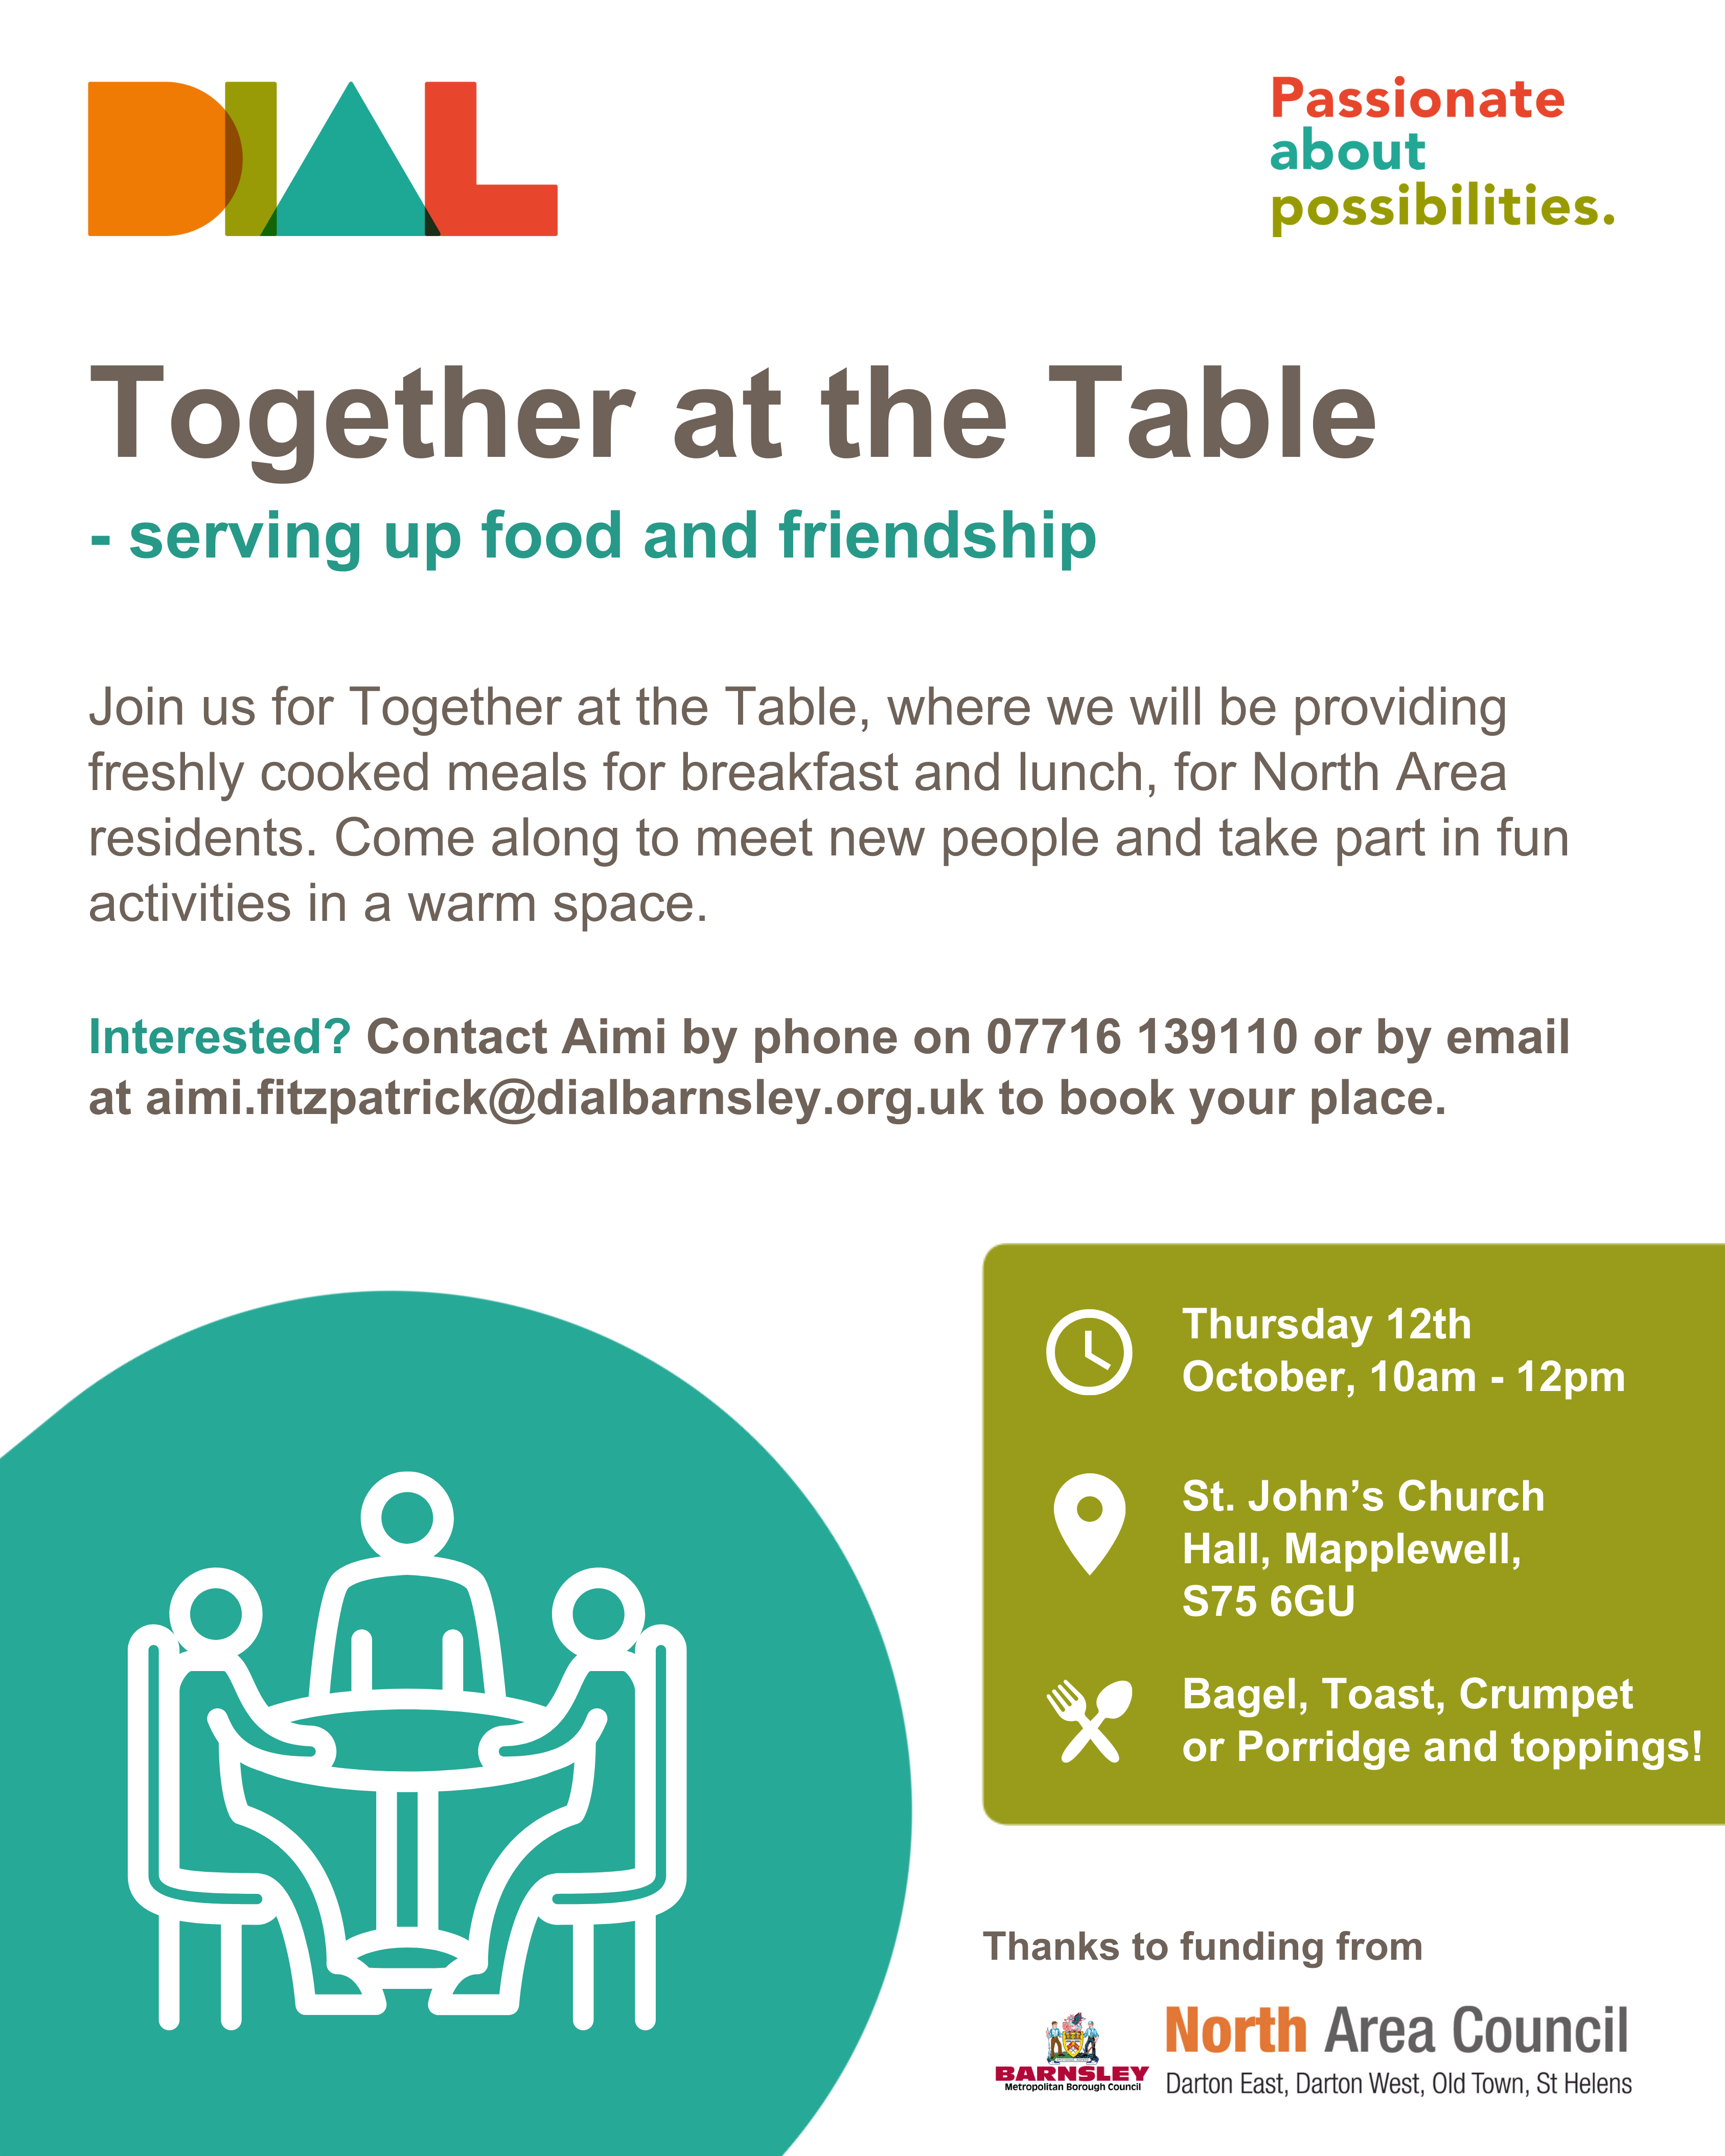 A poster for our Together at the Table events. A white background and using DIAL colours of orange, green, teal and red. The poster includes the DIAL logo, each letter of DIAL being a different DIAL colour, and the tagline of ‘Passionate About Possibilities’. There is also a DIAL teal circle in the bottom left corner with a white icon of three line-art people sitting at a table. Thanks to funding from Barnsley Metropolitan Borough Council and North Area Council.The poster reads: Together at the Table - serving up food and friendship. Join us for Together at the Table, where we will be providing freshly cooked meals for breakfast and lunch, weekly for North Area residents. Come along to meet new people and take part in fun activities in a warm space.Interested? Contact Aimi by phone on 07716 139110 or by email at aimi.fitzpatrick@dialbarnsley.org.uk.When: Thursday 12th October, 10am - 12pm
Where: St John's Church Hall, Mapplewell, S75 6GU
Menu: